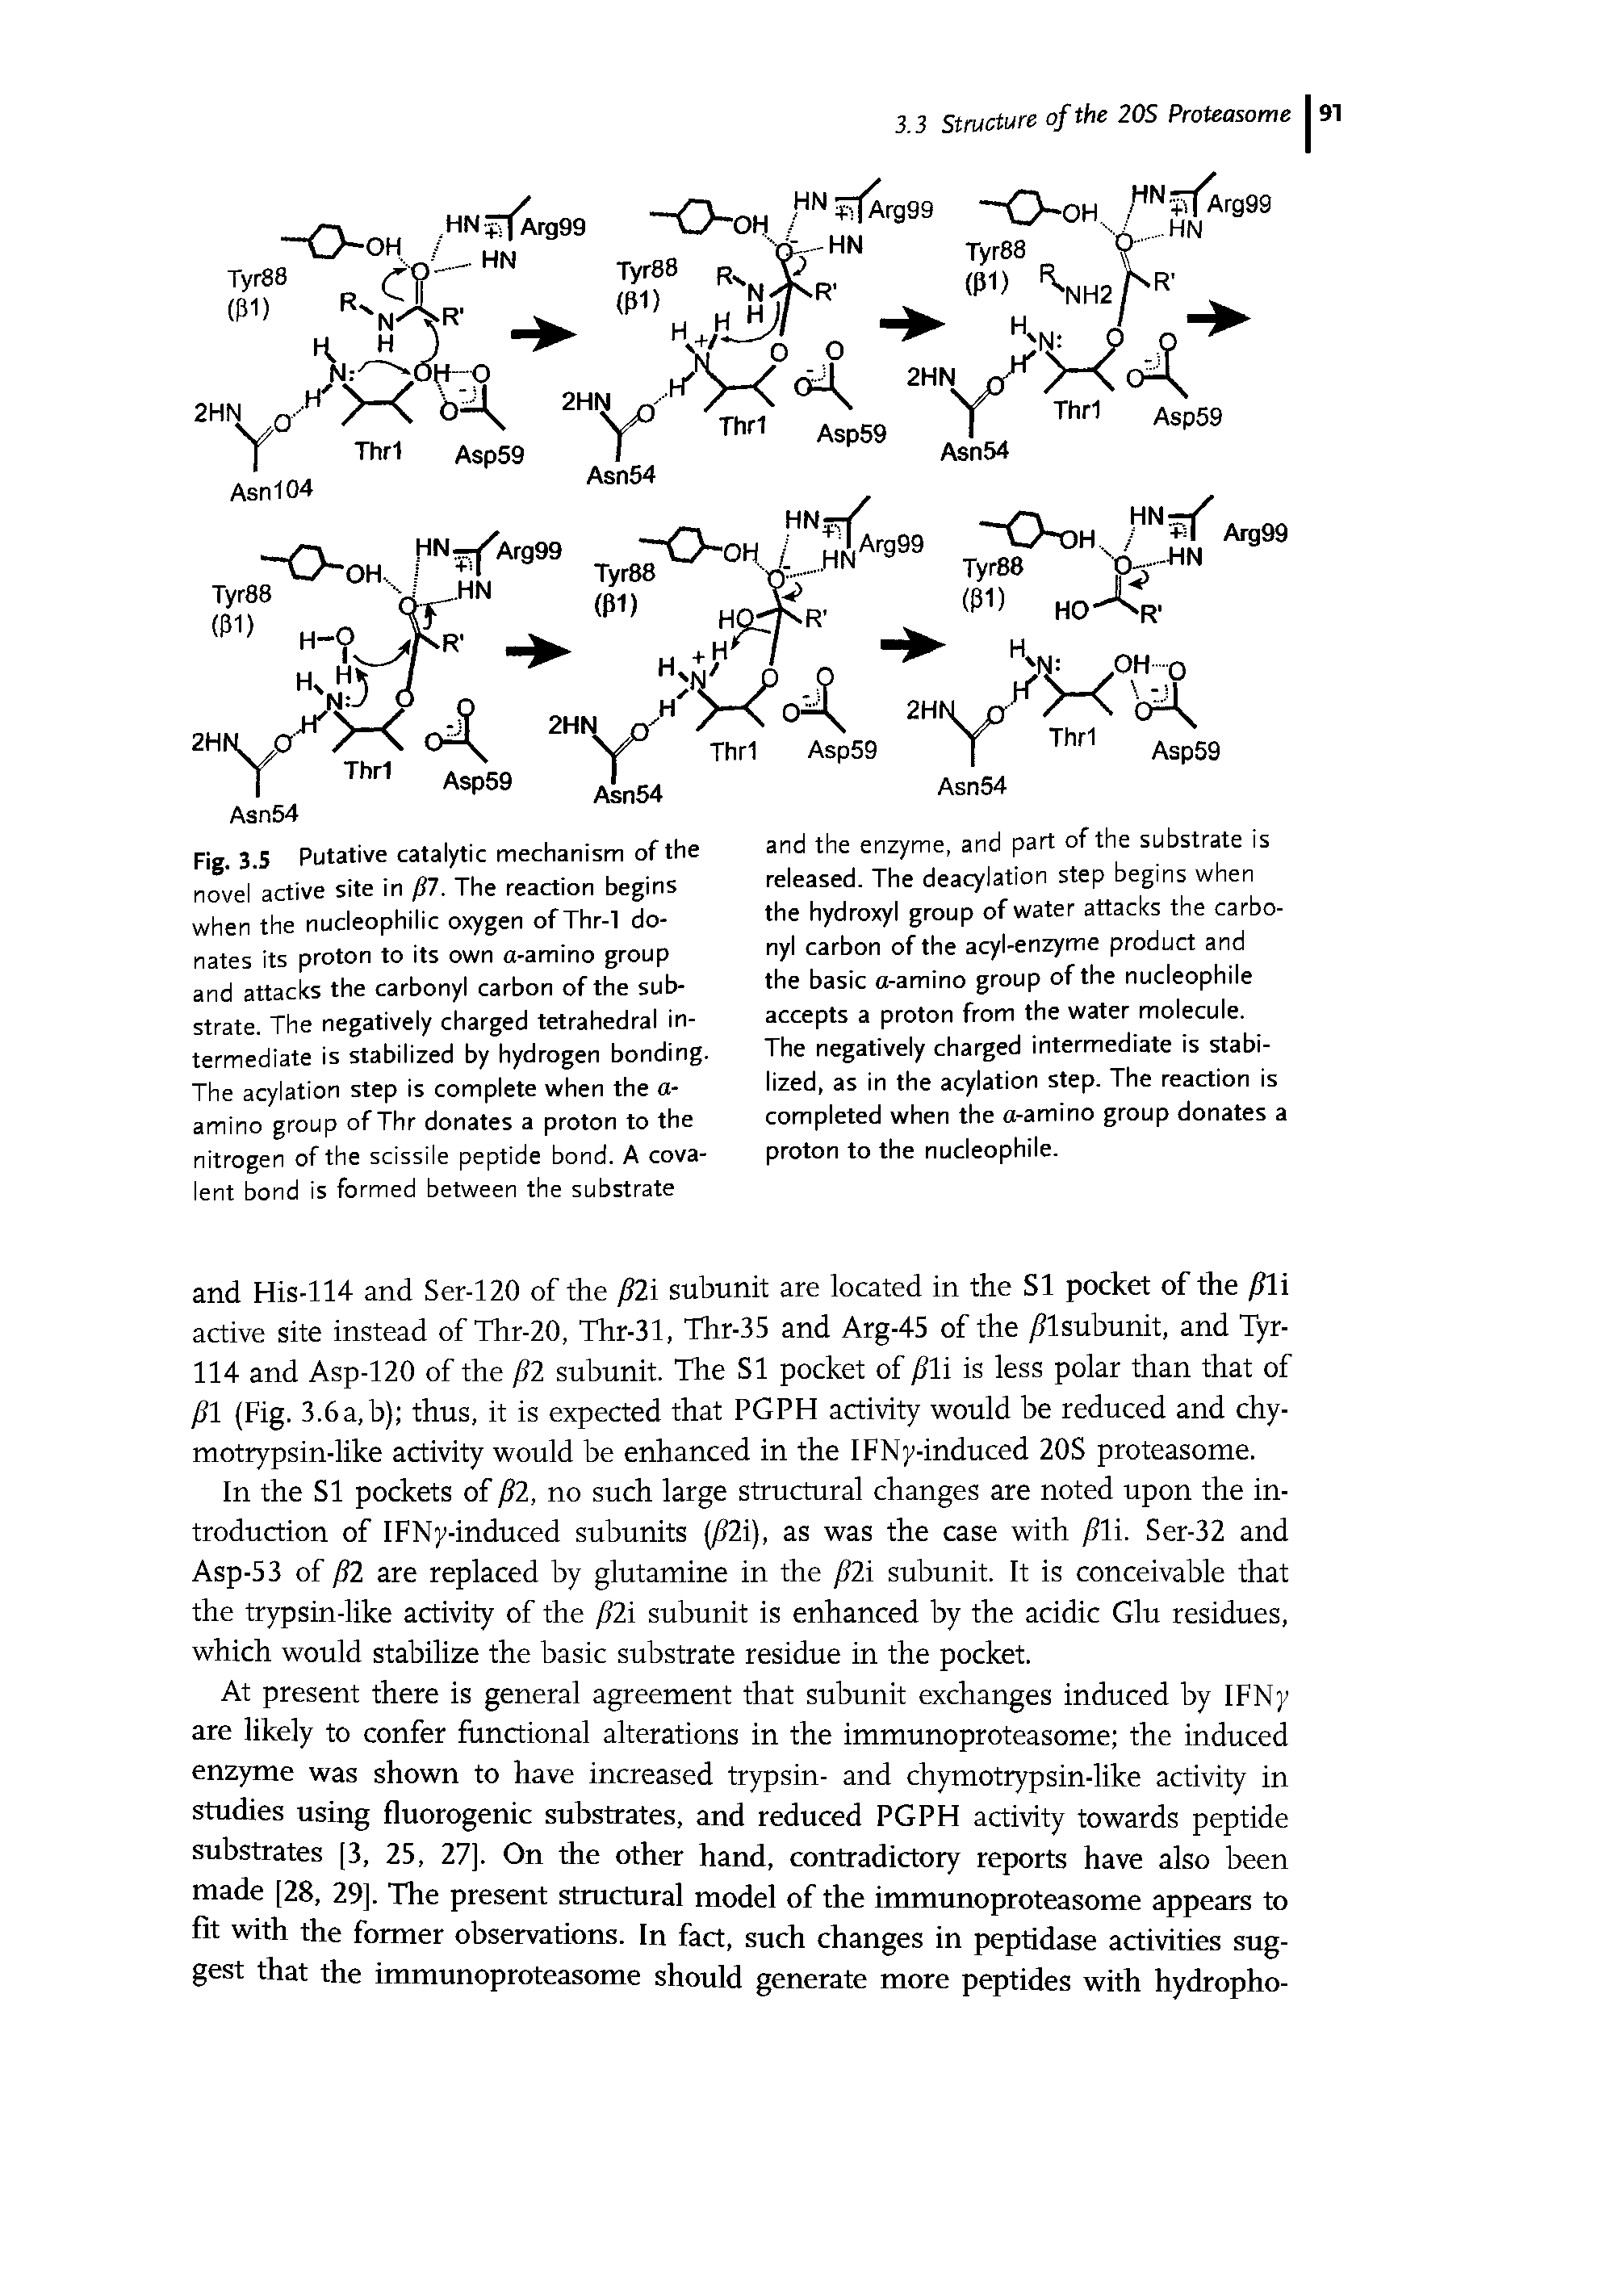 Fig. 3.S Putative catalytic mechanism of the novel active site in fl7. The reaction begins when the nucleophilic oxygen of Thr-1 donates its proton to its own a-amino group and attacks the carbonyl carbon of the substrate. The negatively charged tetrahedral intermediate is stabilized by hydrogen bonding. The acylation step is complete when the a-amino group of Thr donates a proton to the nitrogen of the scissile peptide bond. A covalent bond is formed between the substrate...